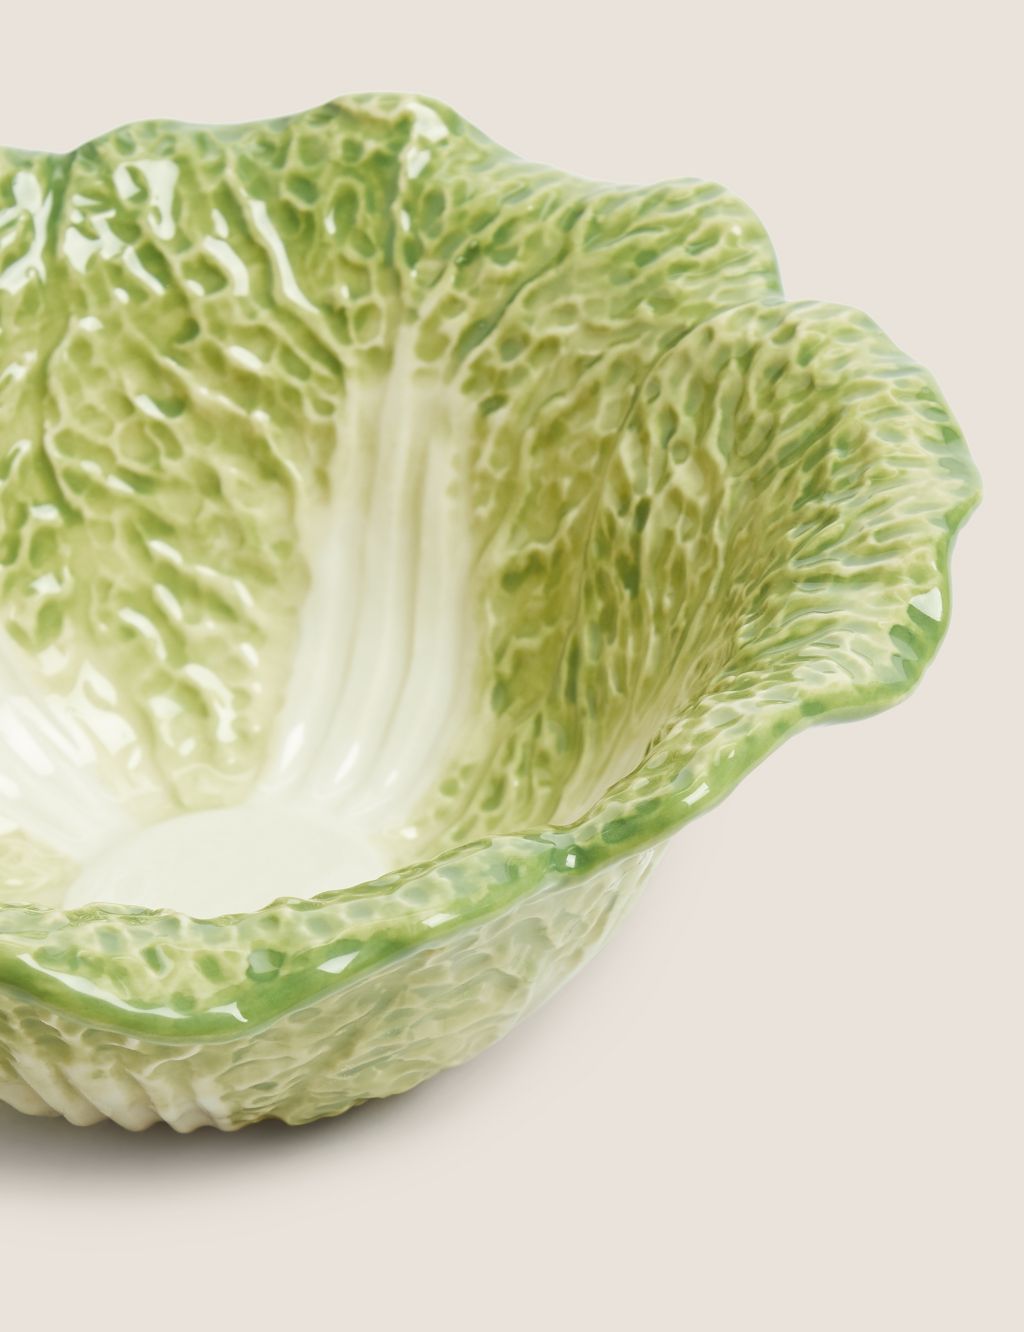 Cabbage Serving Bowl 1 of 4